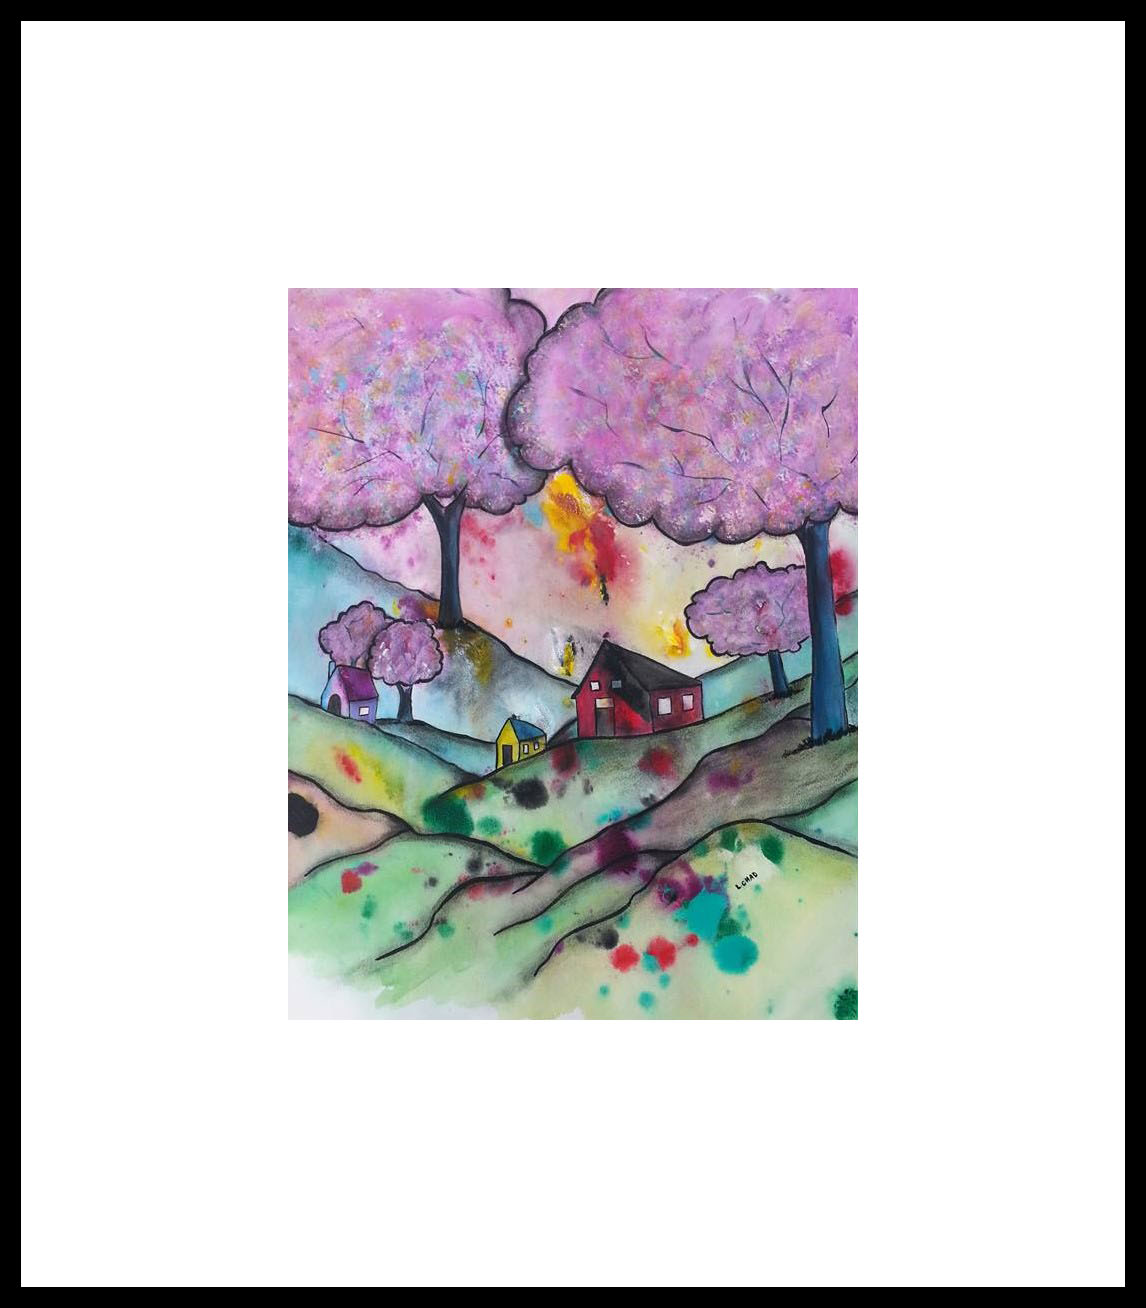 2015-18 "Cotton Candy Trees"
Framed 29" x 35"
Mixed media on 246 lb. paper
SOLD